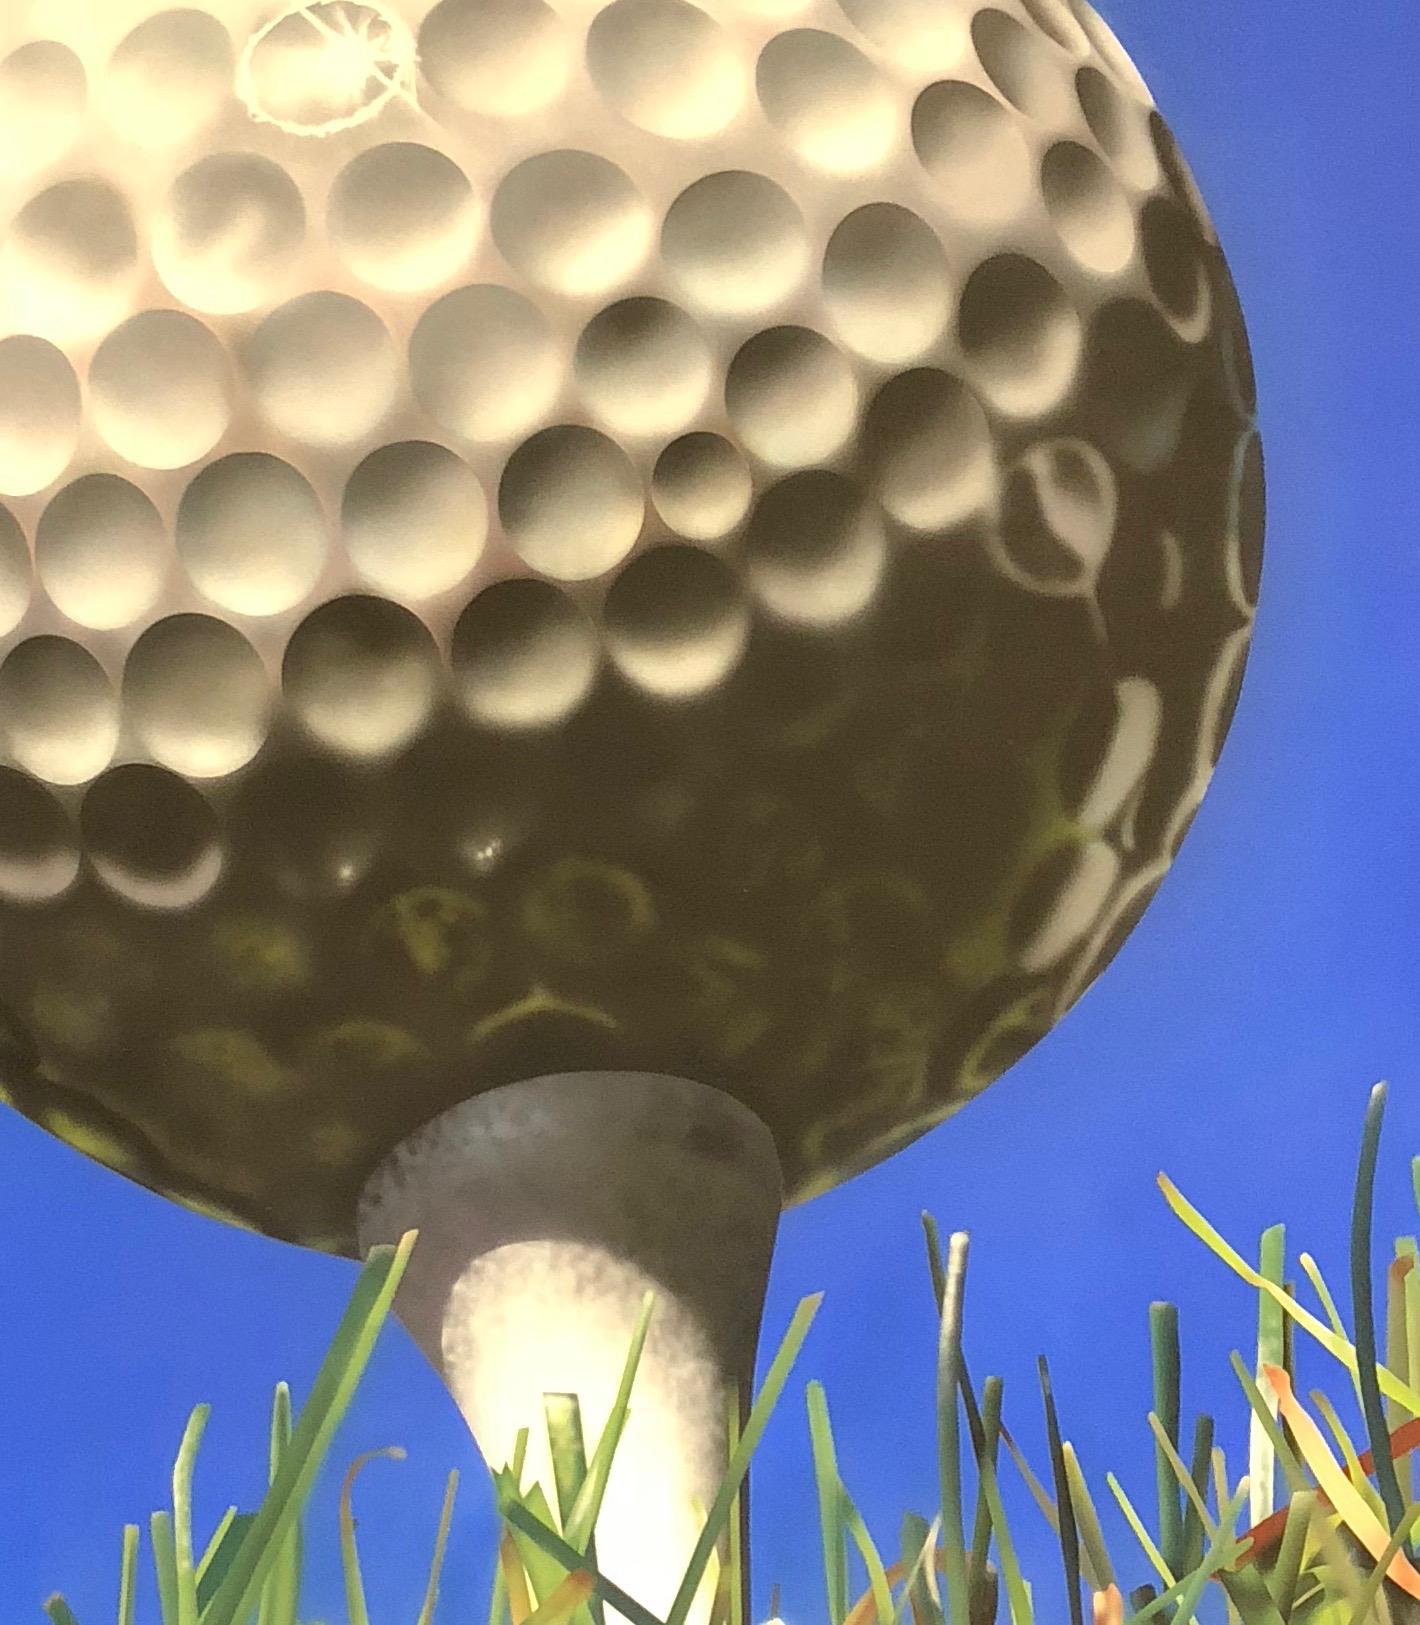 <p>Artist Comments<br />This is the first painting in a series of ten. It depicts a golf ball sitting on a tee. The view is from below the grass line looking up at the golf ball. This painting was completed using an airbrush and templates for each